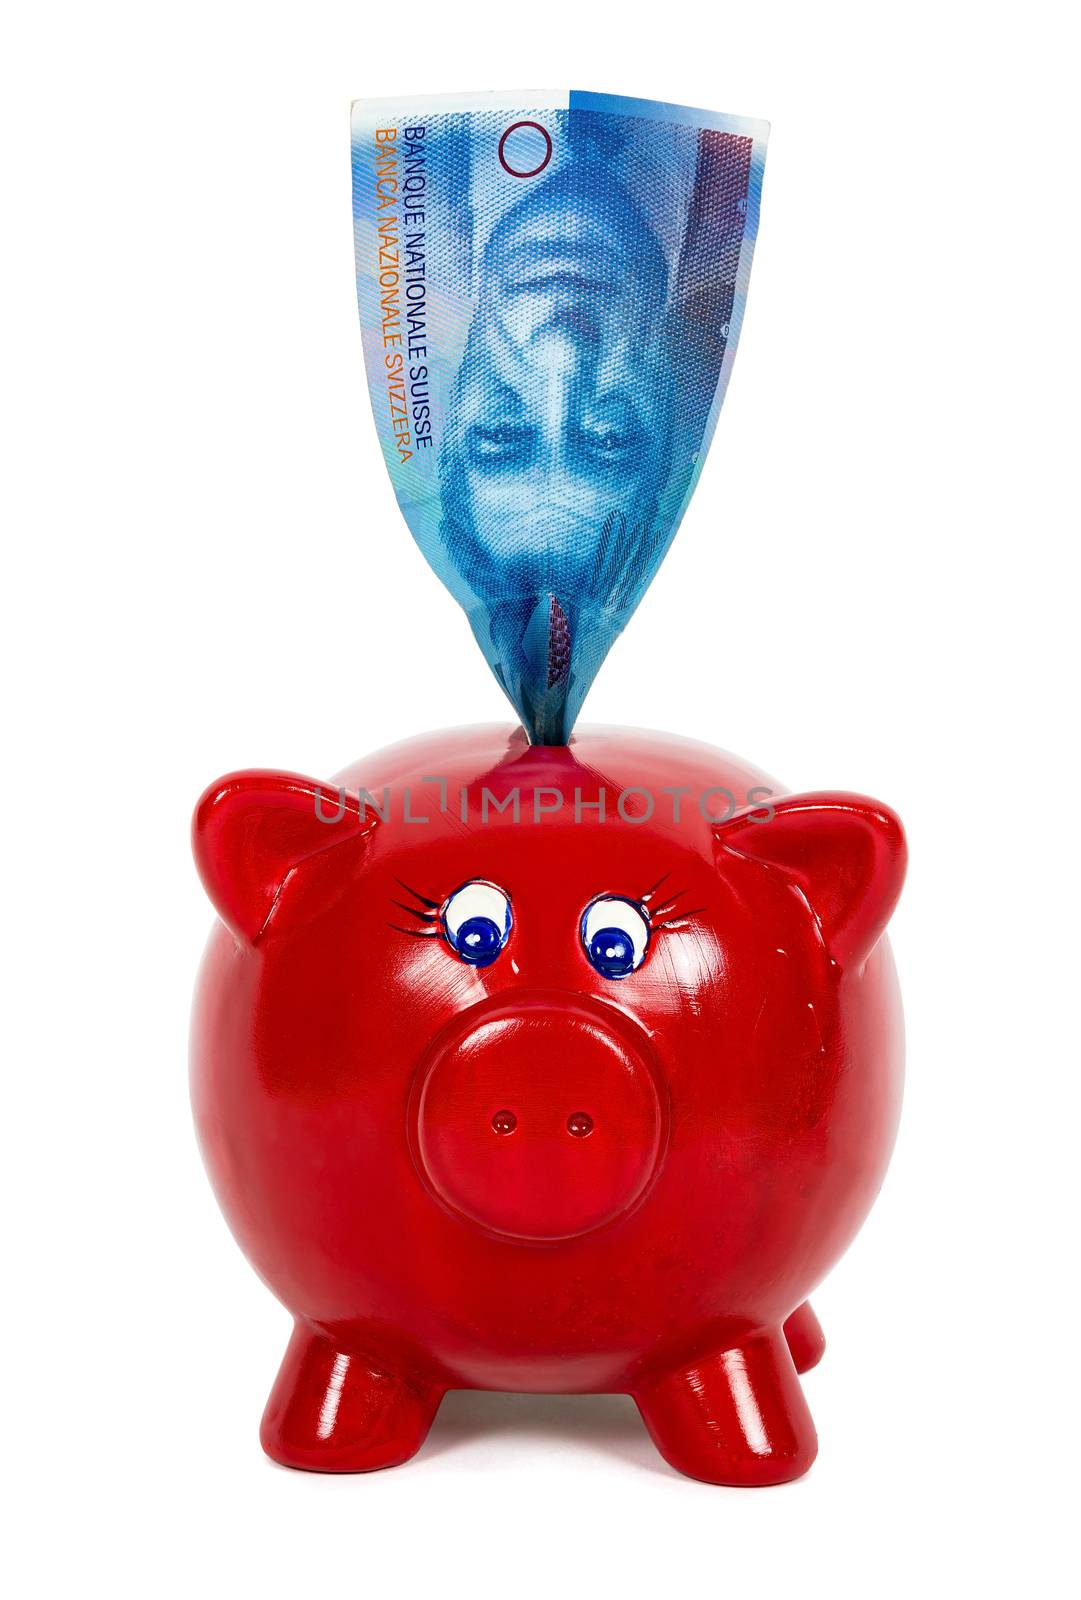 Piggy bank and 100 swiss franc banknote by mkos83